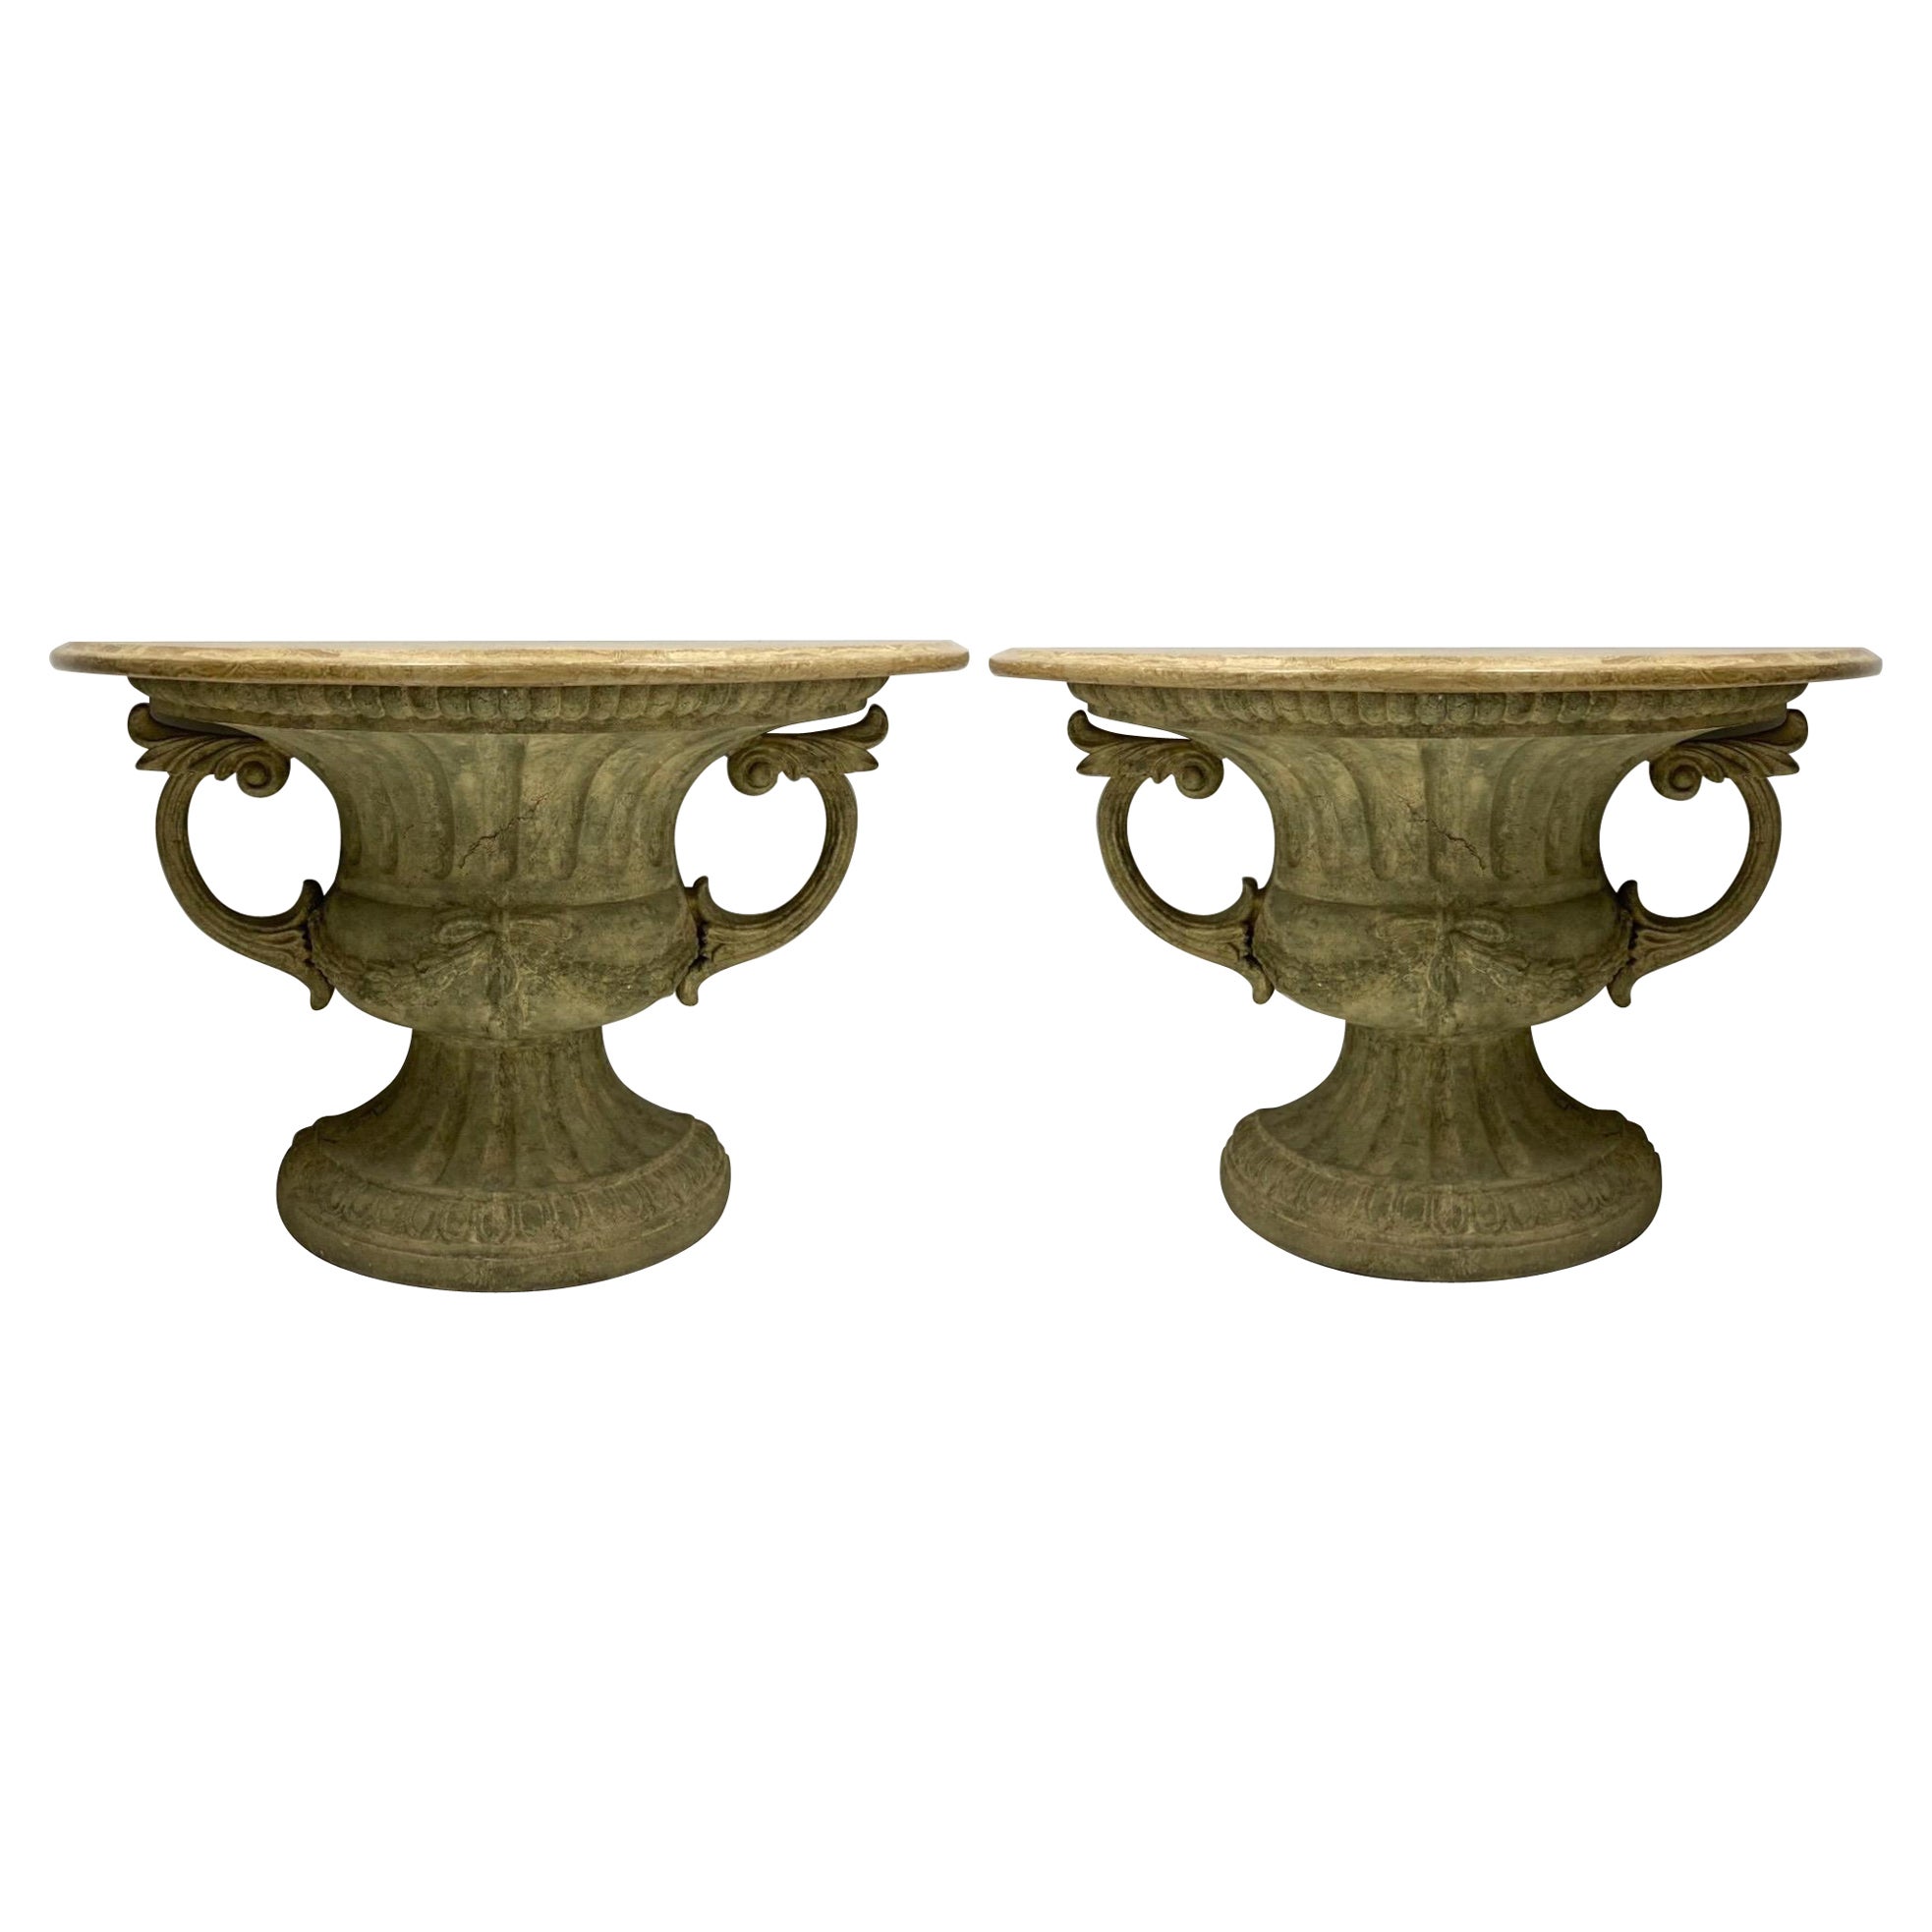 20th-C. Neoclassical Style Urn Form Console Tables With Marble Tops, Pair